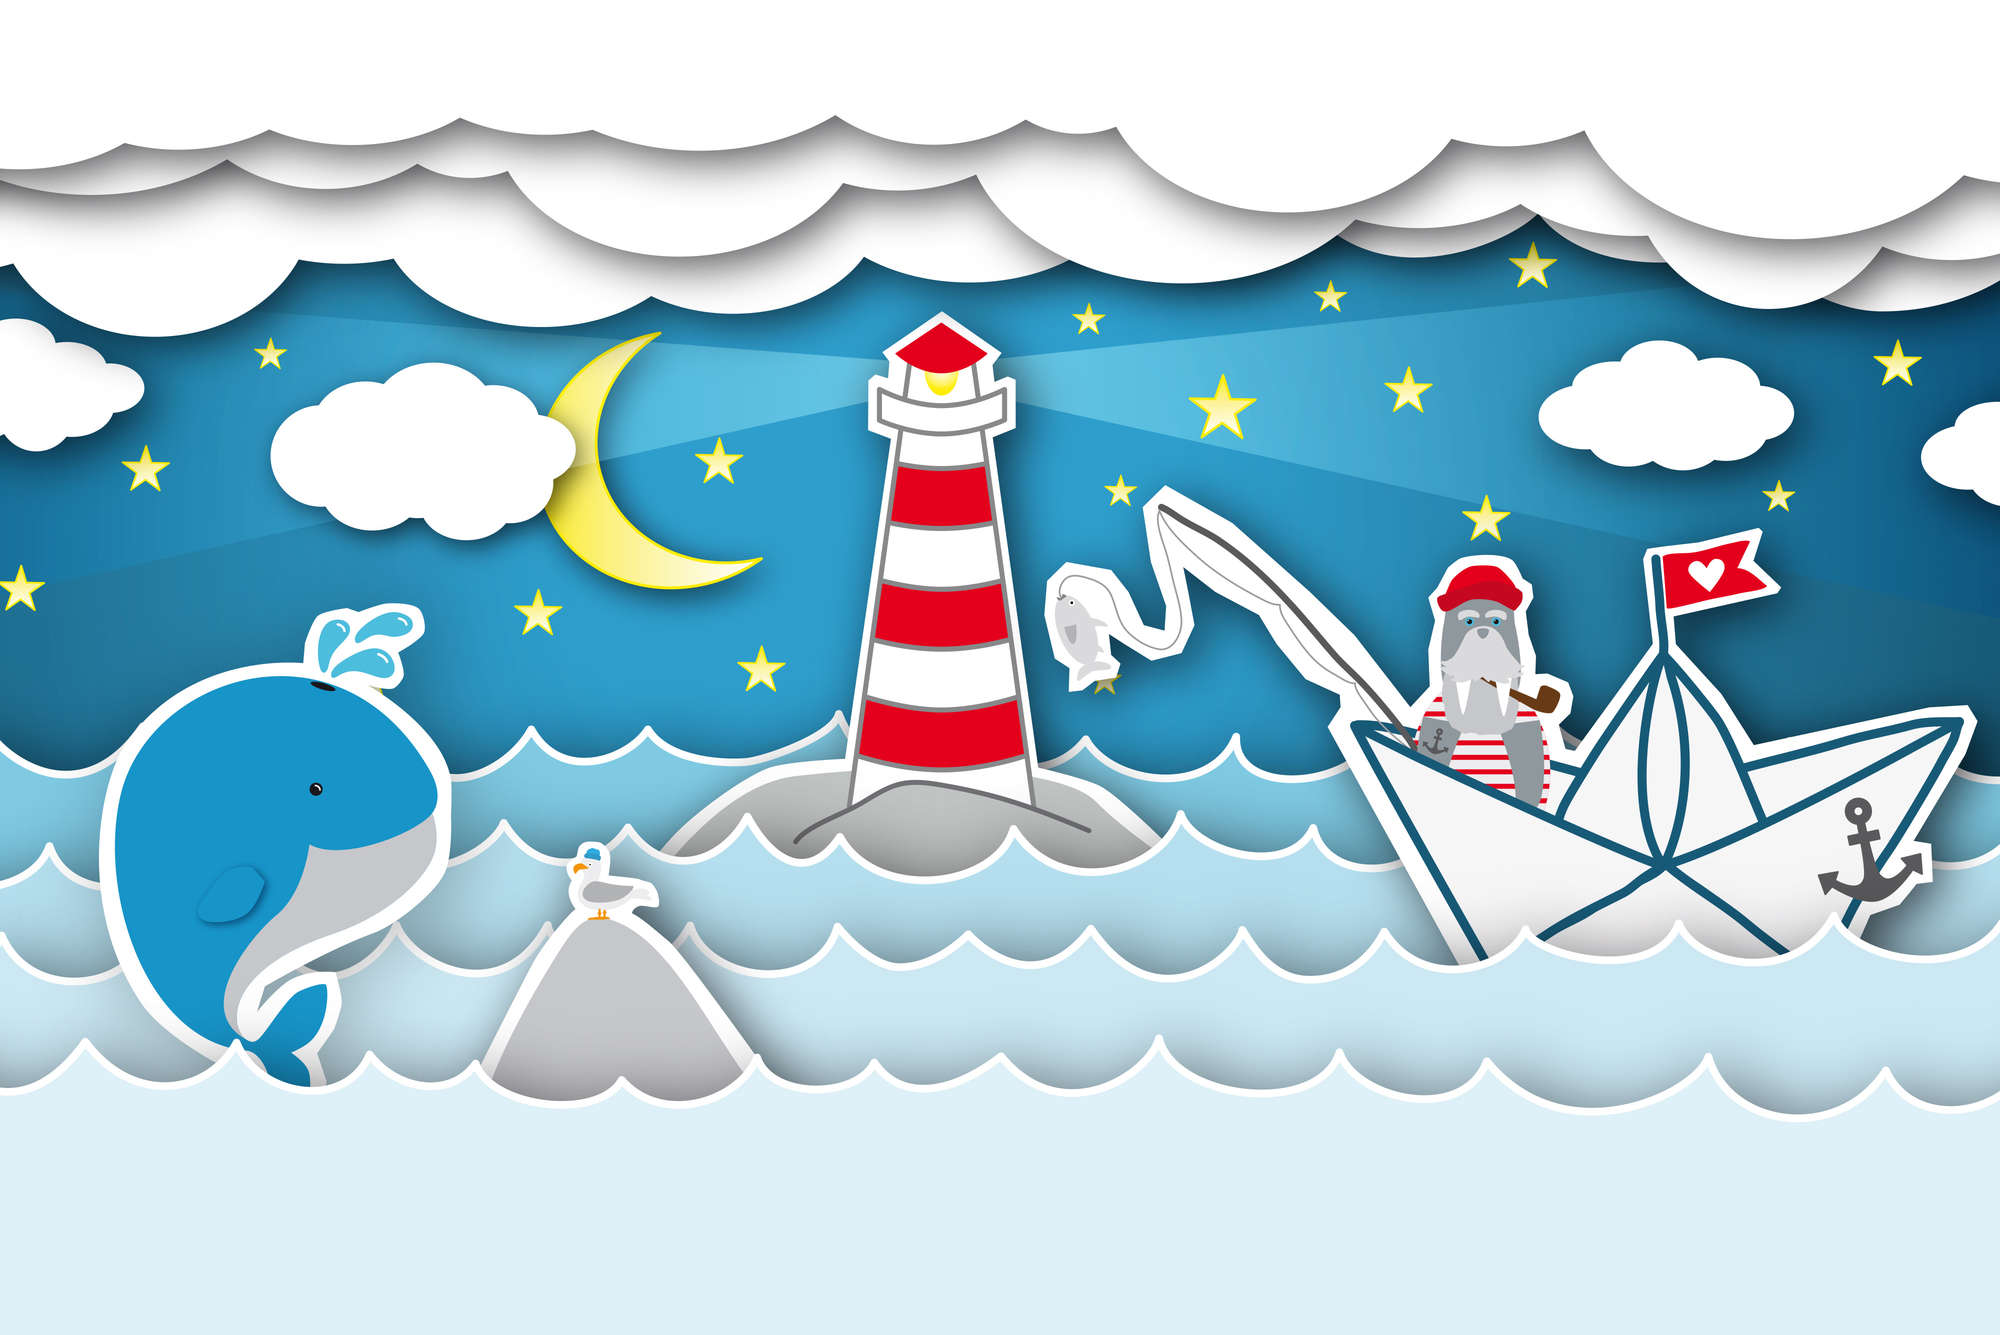             Children mural sea at night with lighthouse and sea bear on premium smooth nonwoven
        